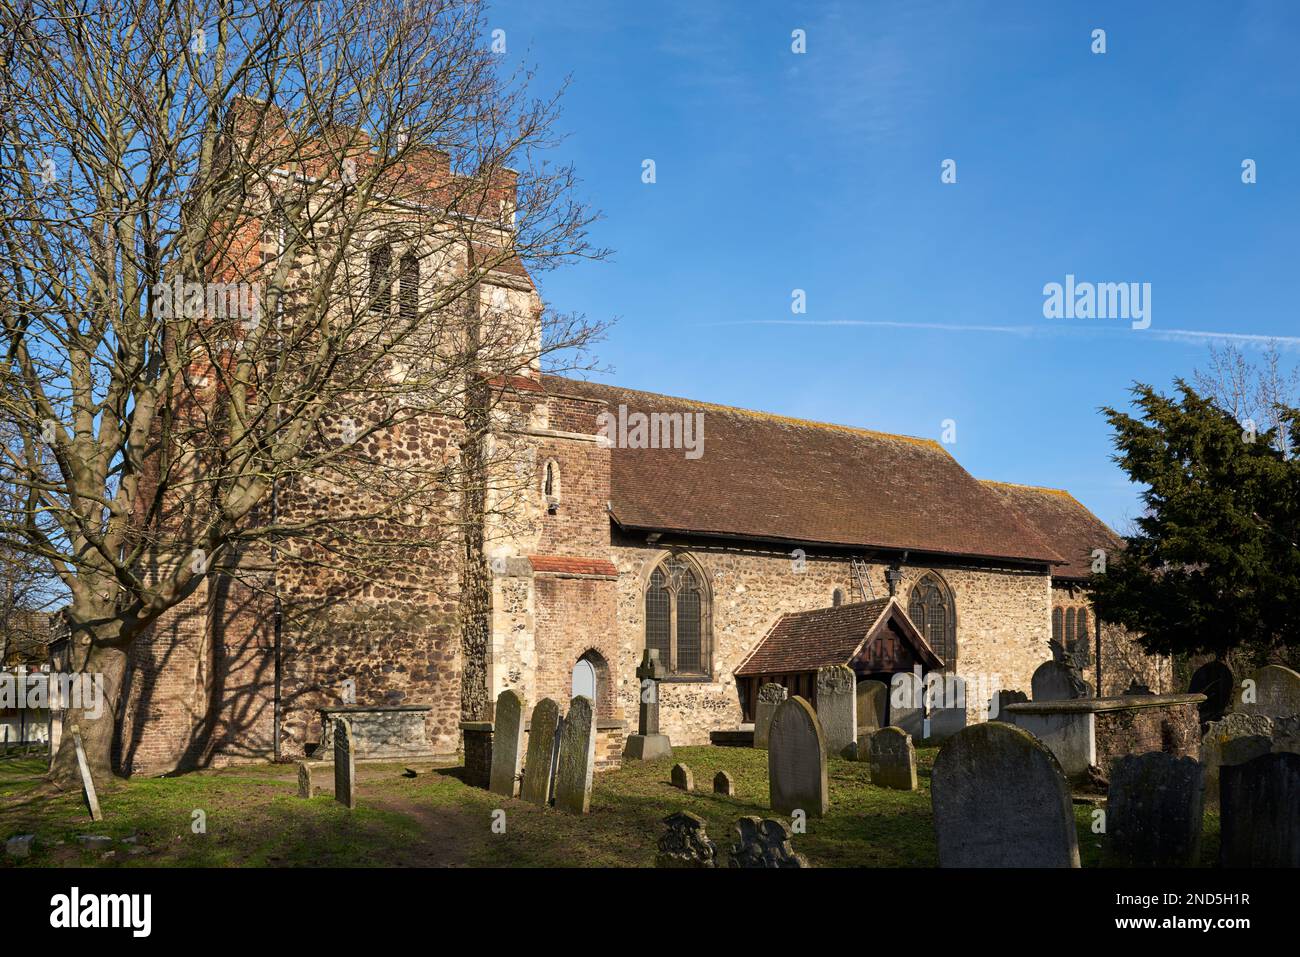 The ancient Grade I listed church of St Mary Magdalene, East Ham, London UK Stock Photo